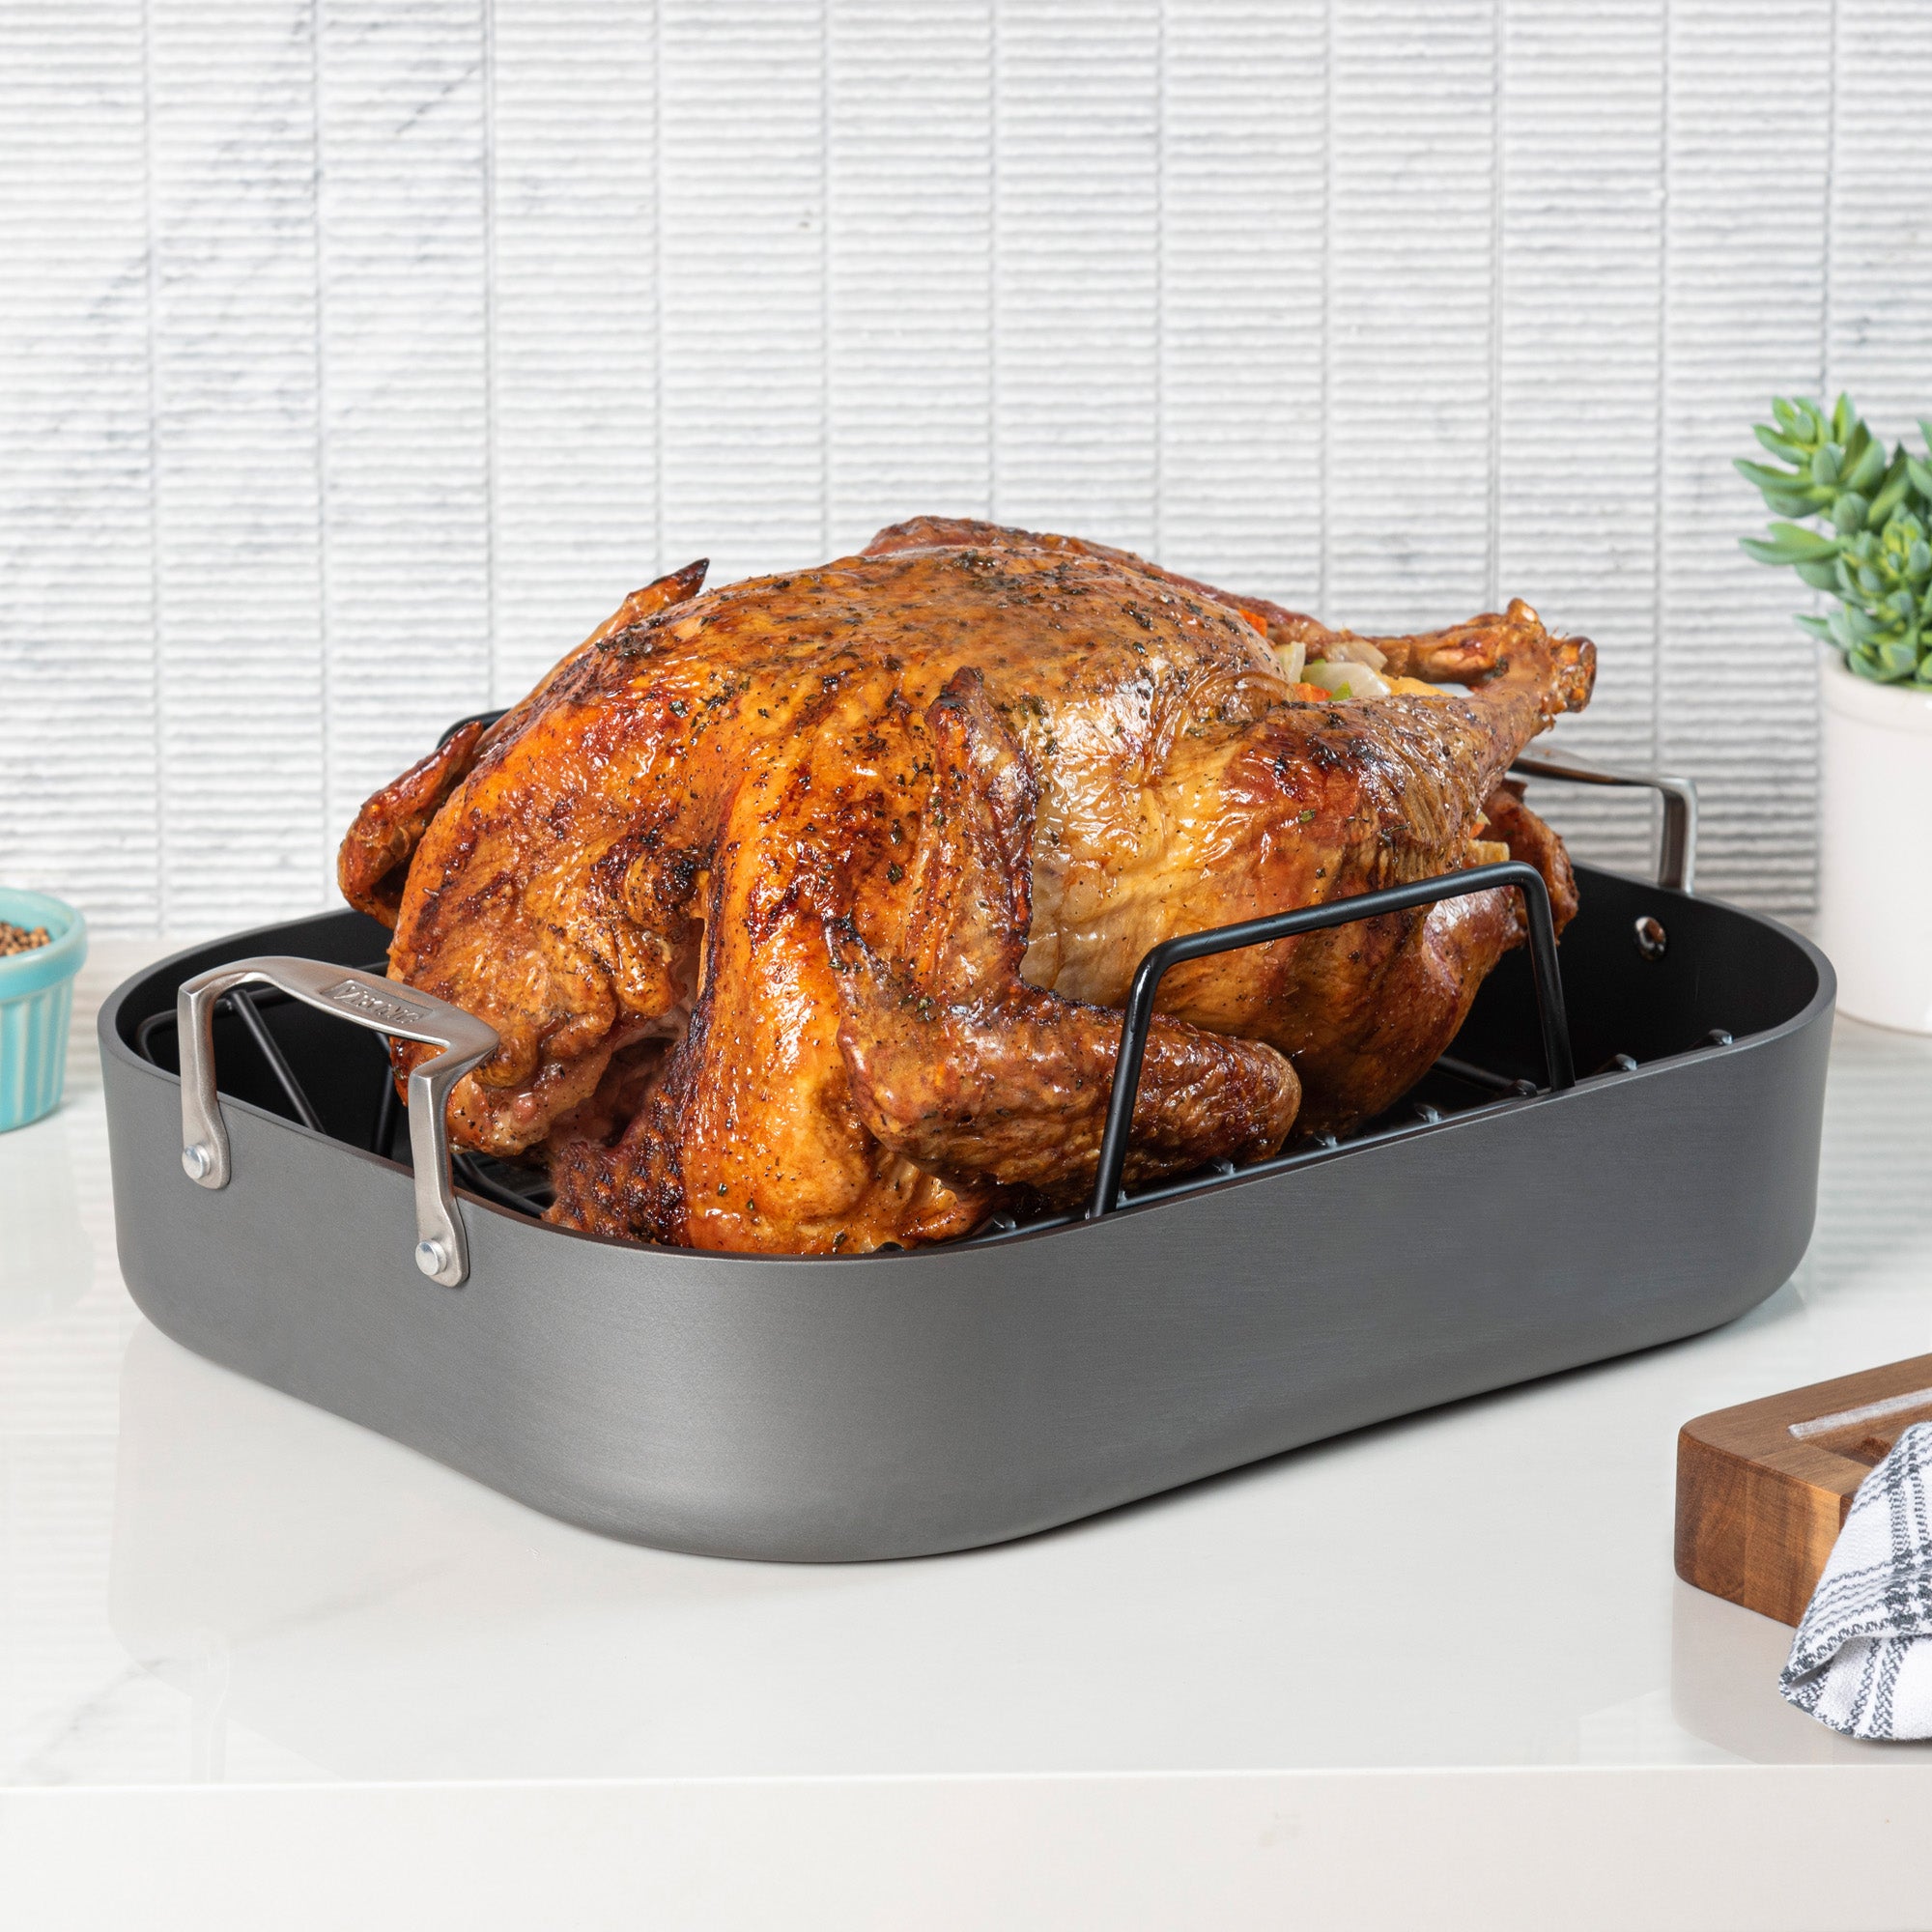 Nordic Ware Extra Large Roaster with Rack